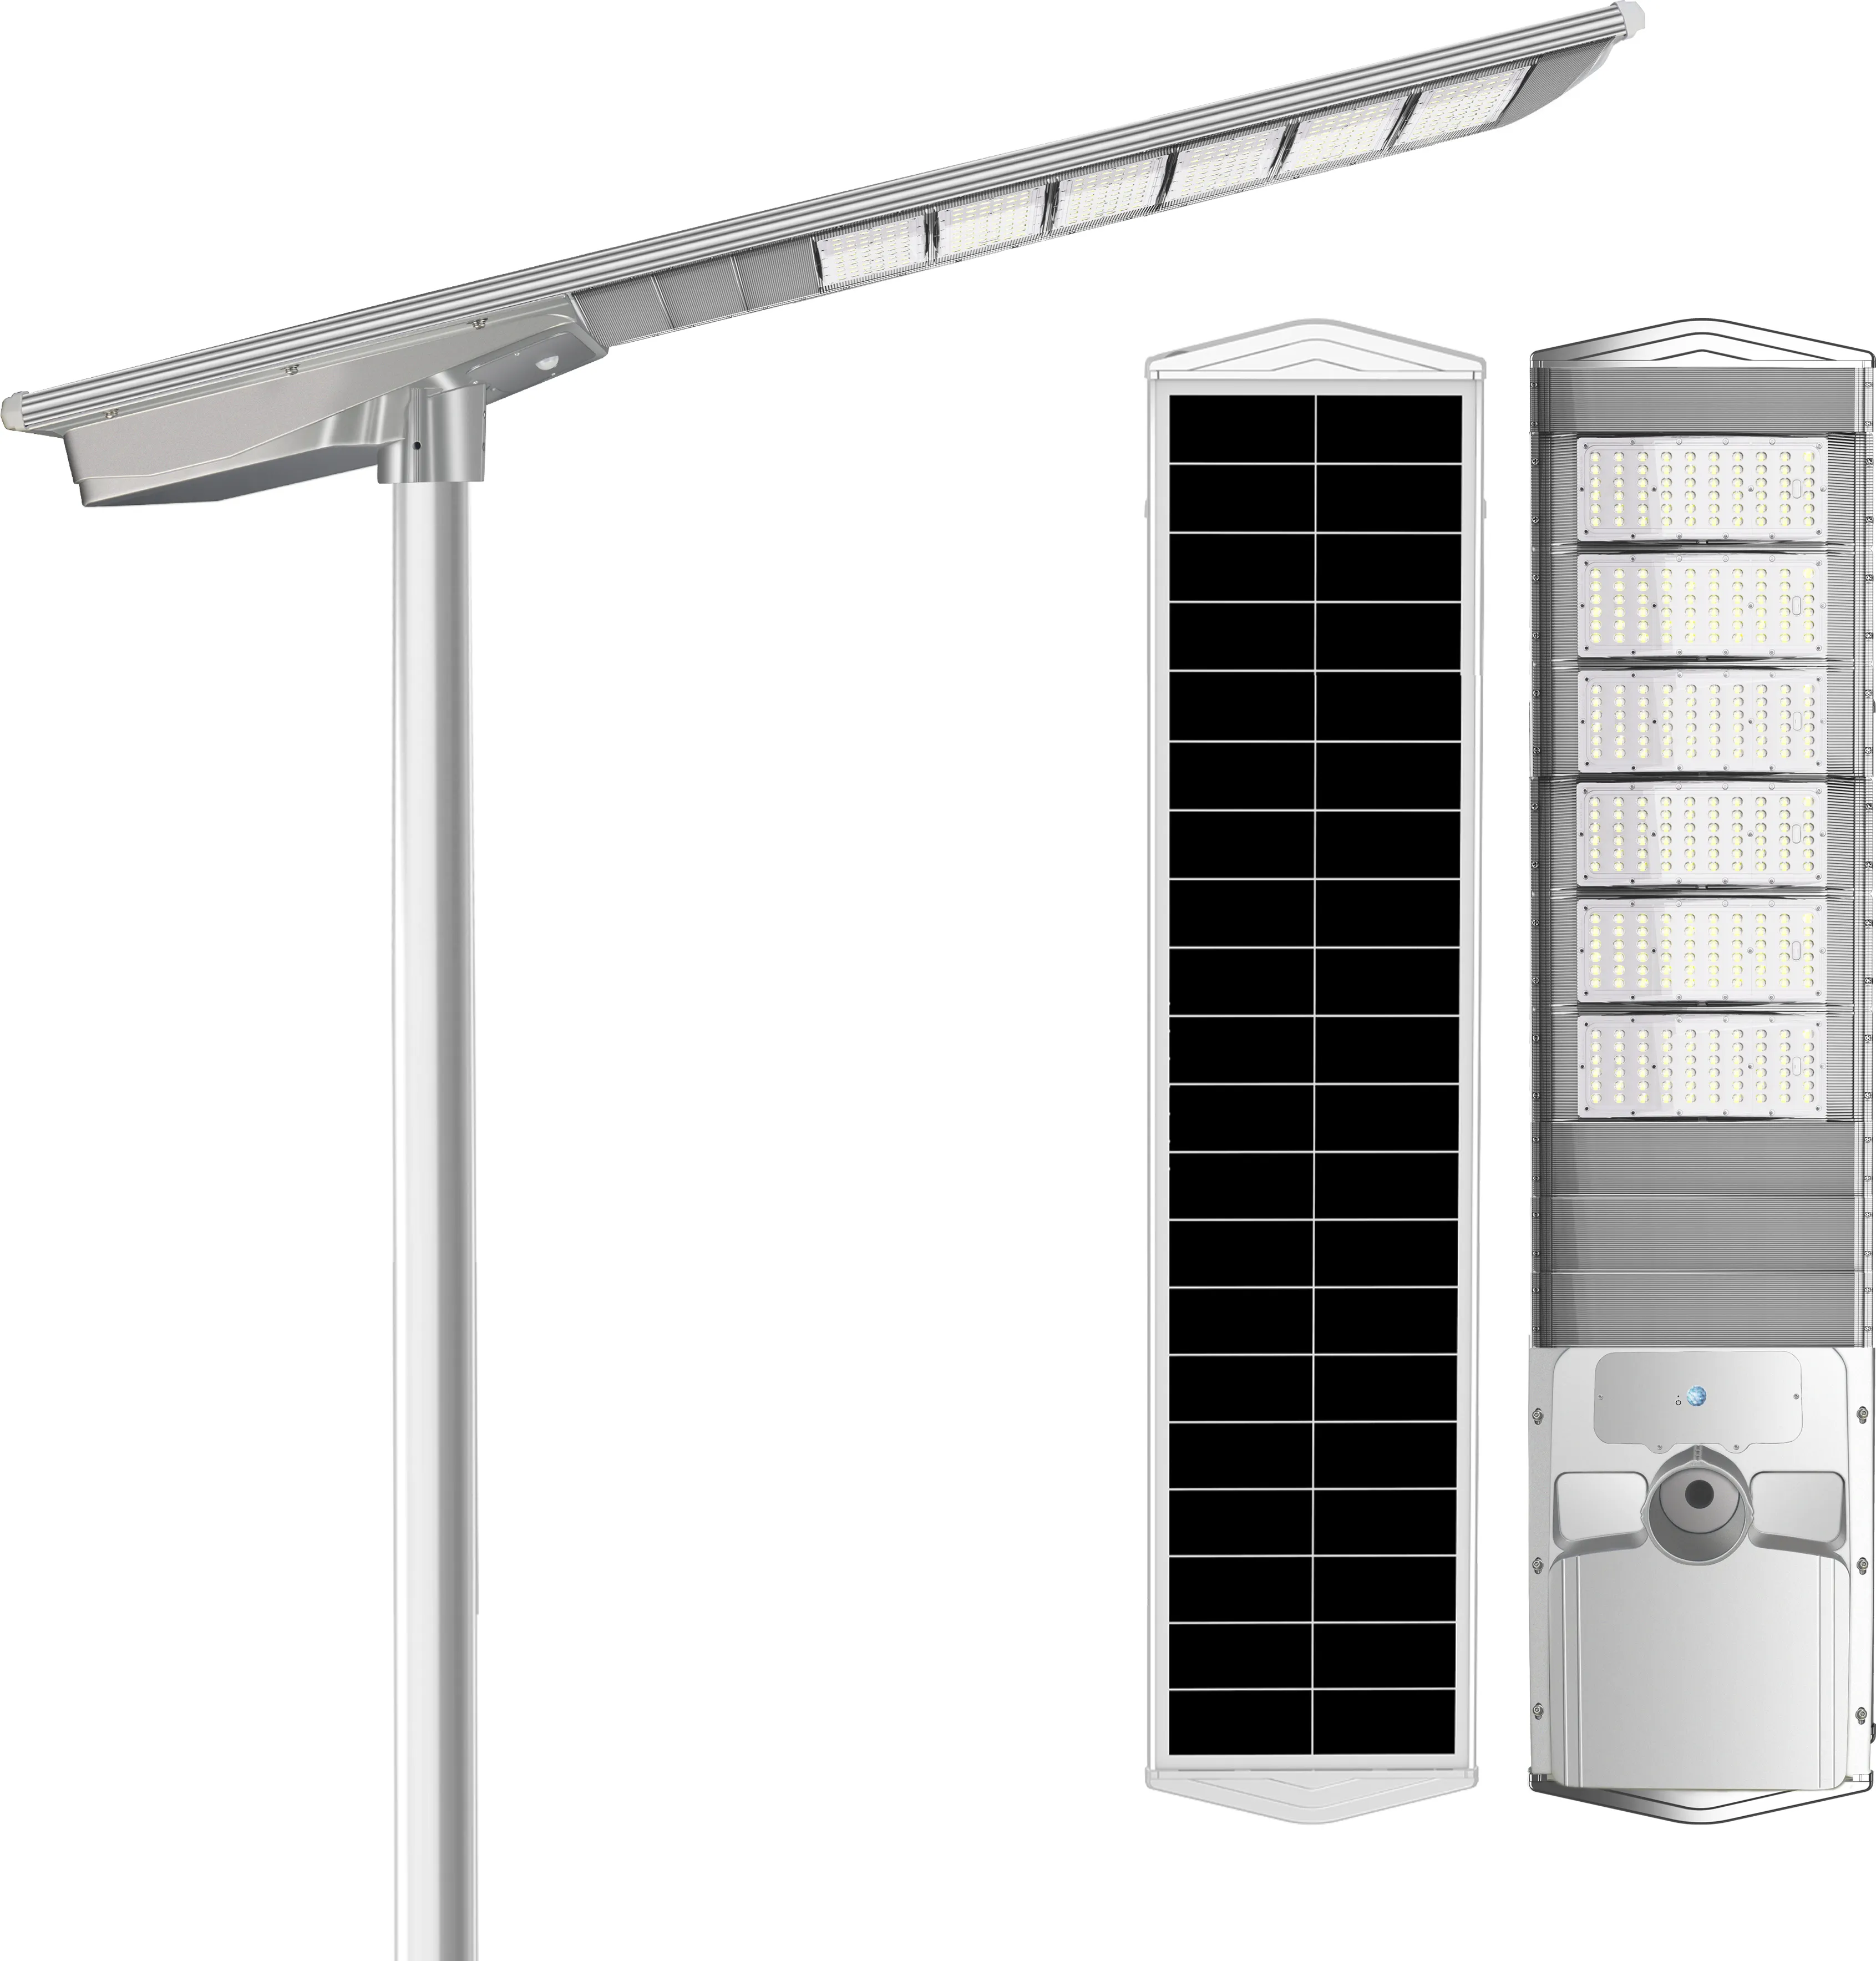 MPPT Intergrated High Brightness IP65 Waterproof Outdoor Power Energy System All In 1 Led Solar Street Light Bulbs Top Sellers